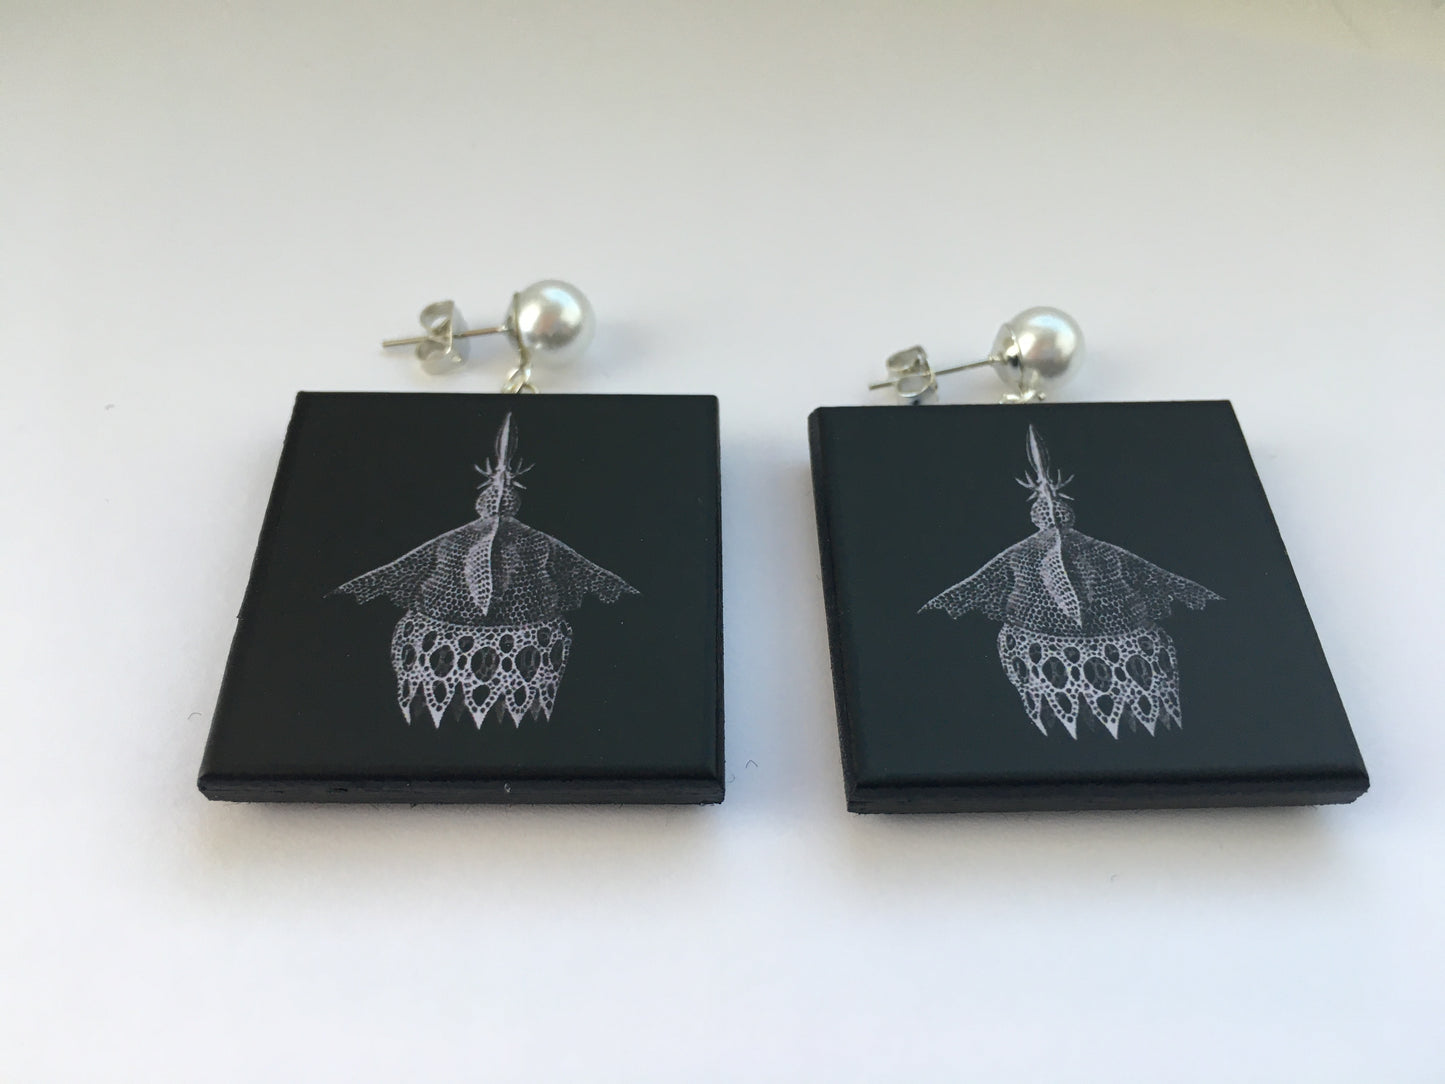 Sustainable wood earrings with stud pearls inspired by Ernst Haeckel marine shells, radiolaria black and white illustration. These earrings are completely handmade by Obljewellery